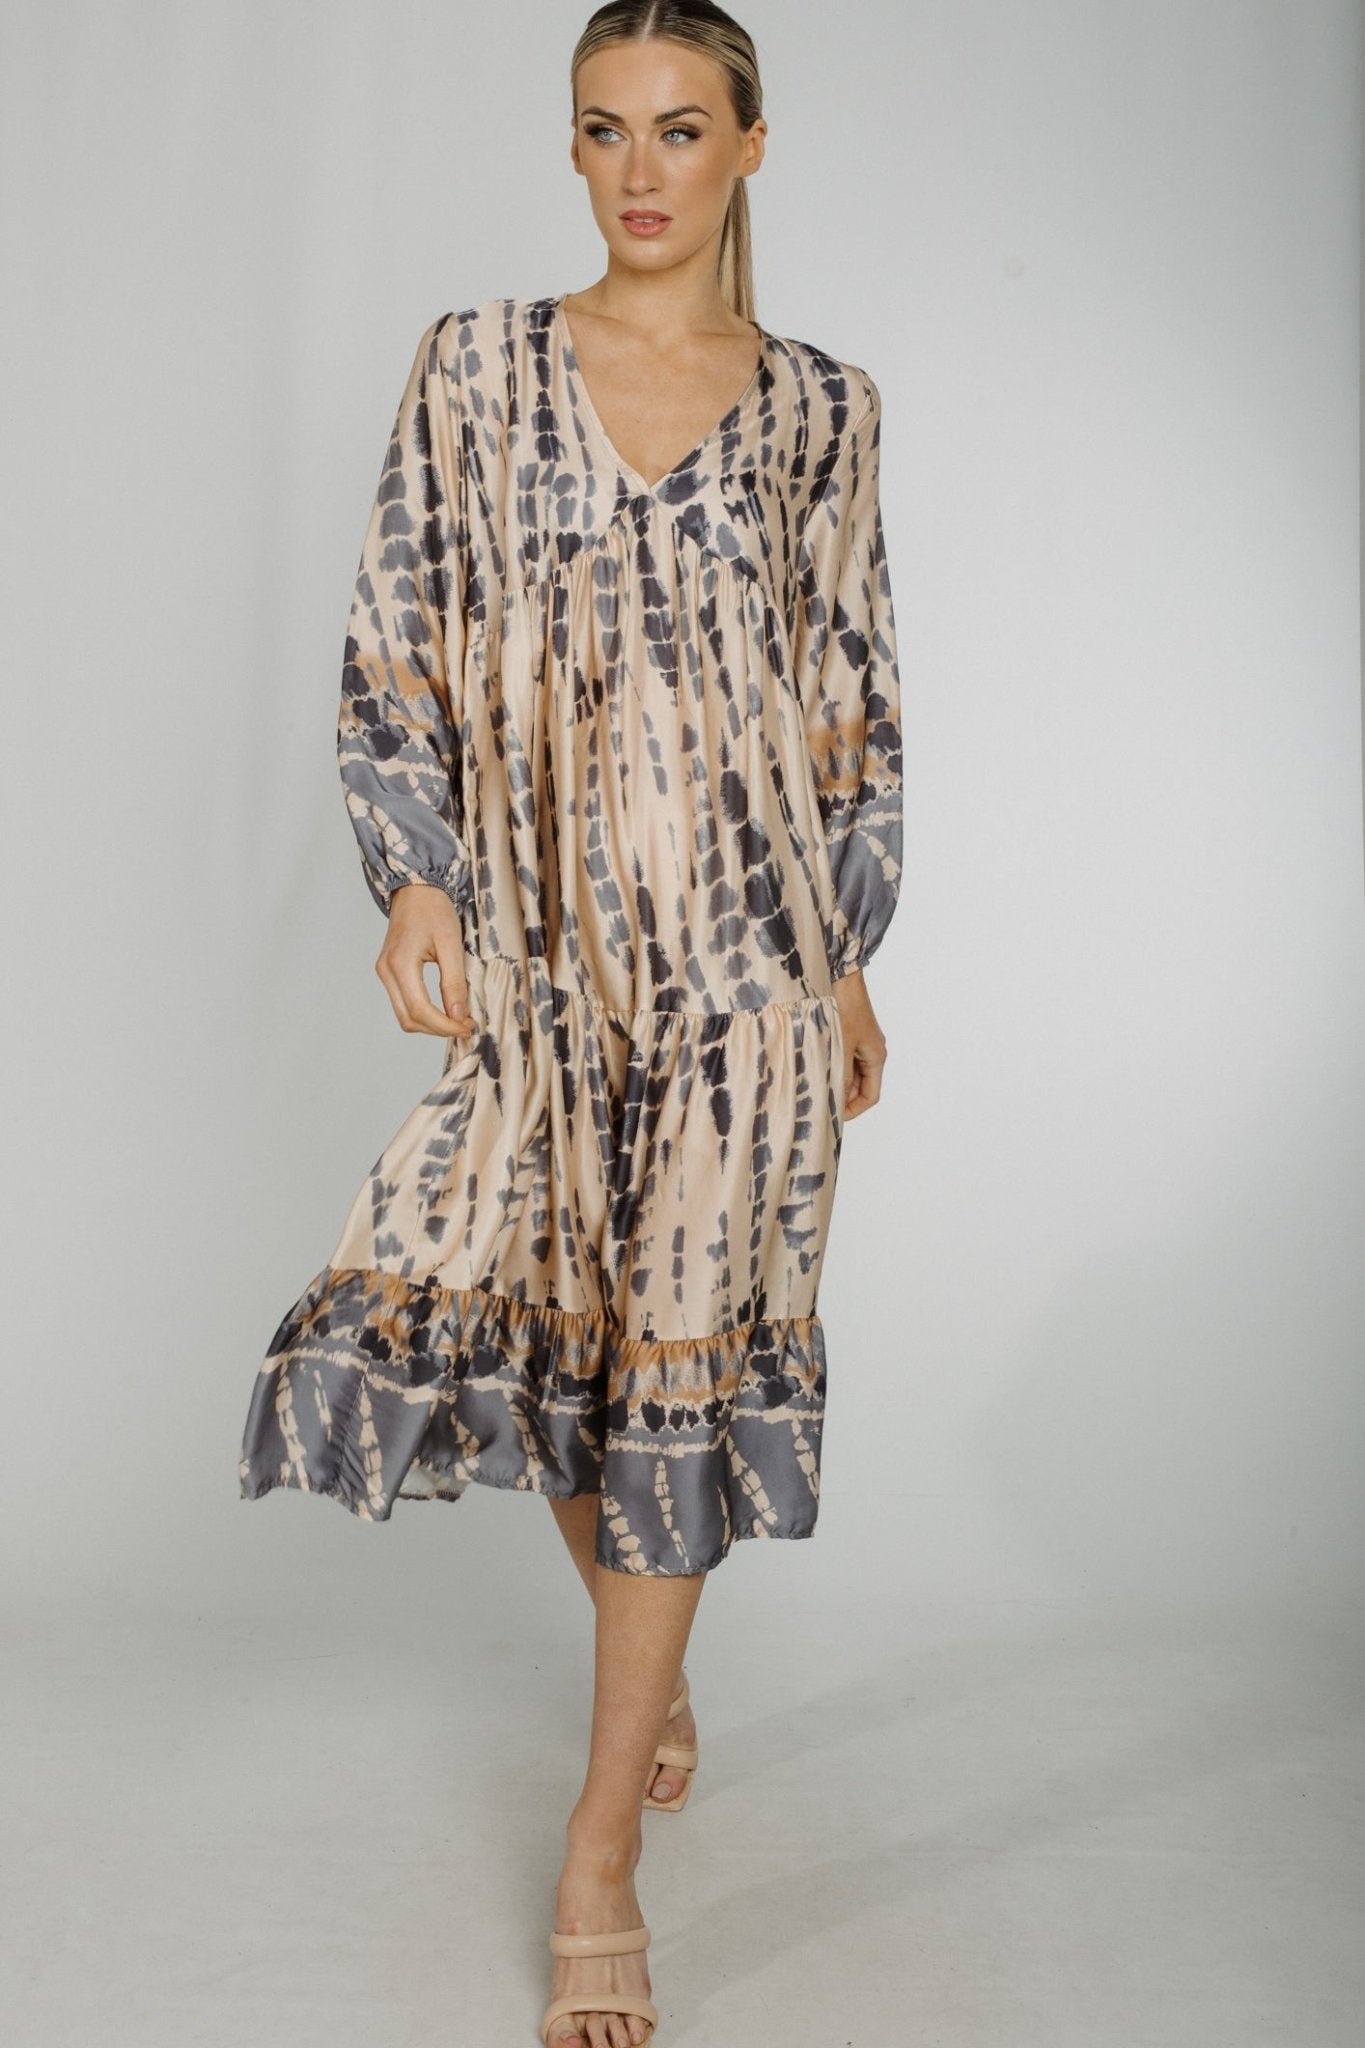 Belle Abstract Printed Dess In Neutral Mix - The Walk in Wardrobe